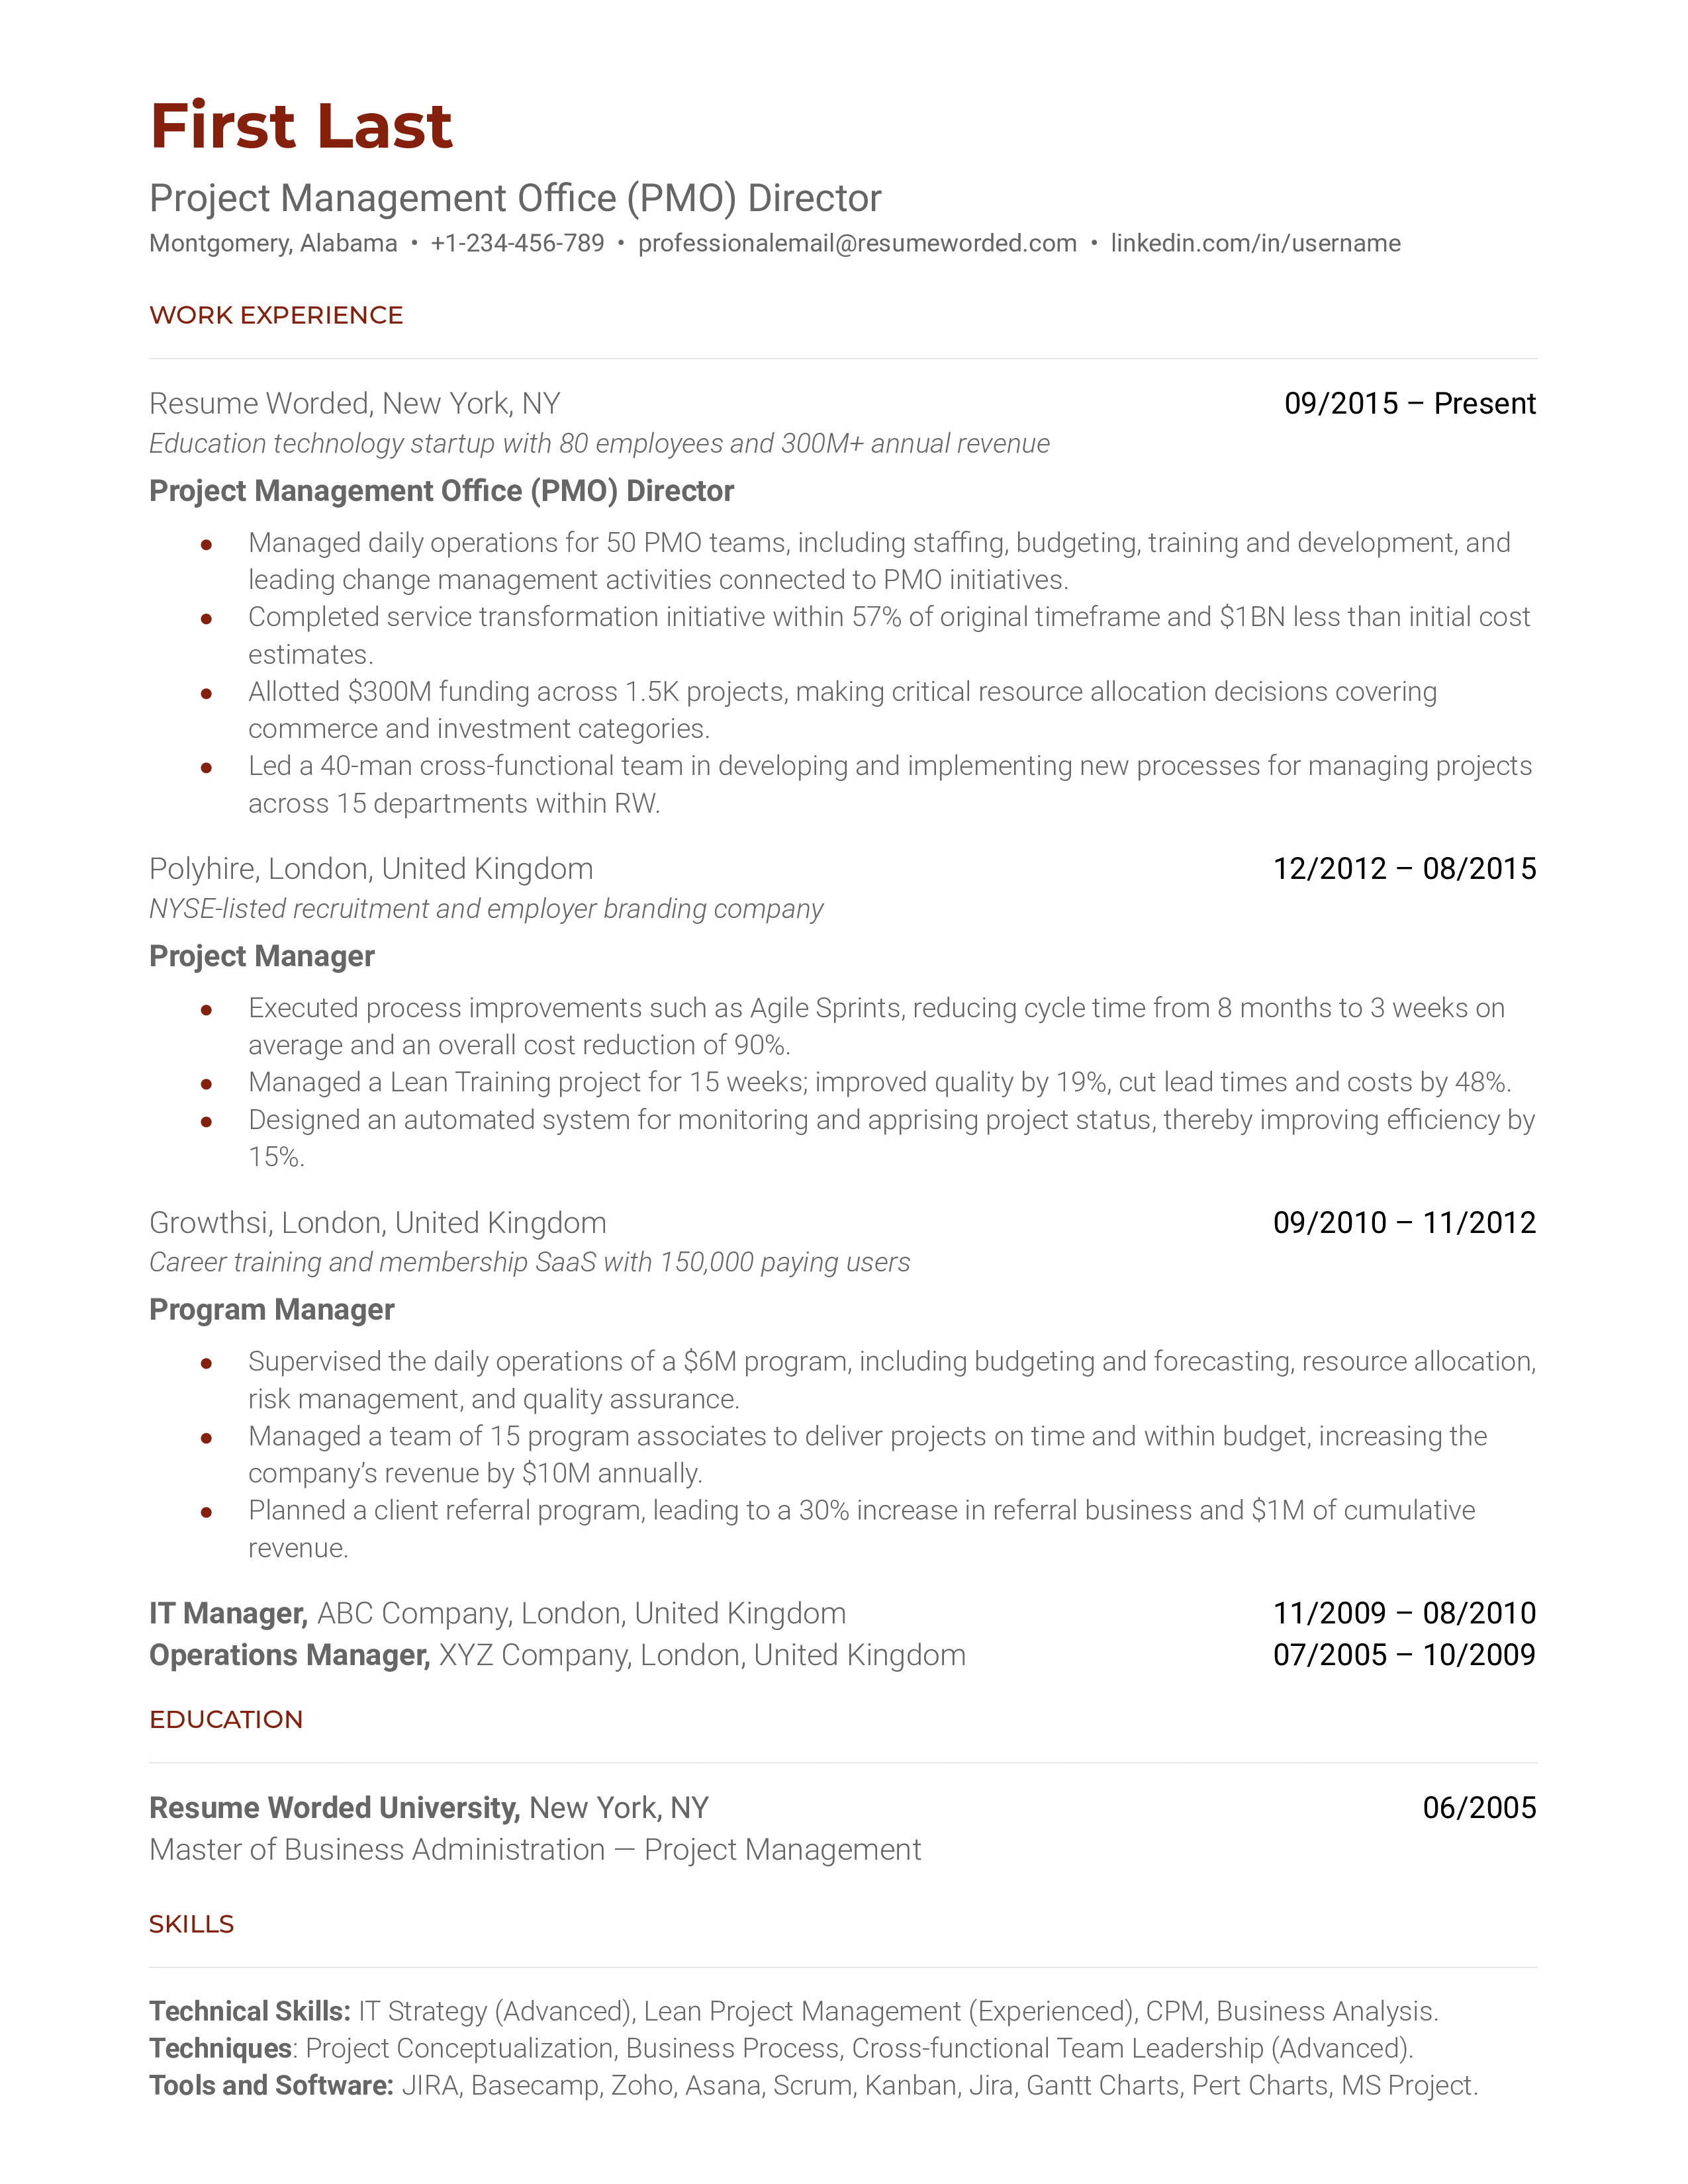 Project Management Office (PMO) Director Resume Sample